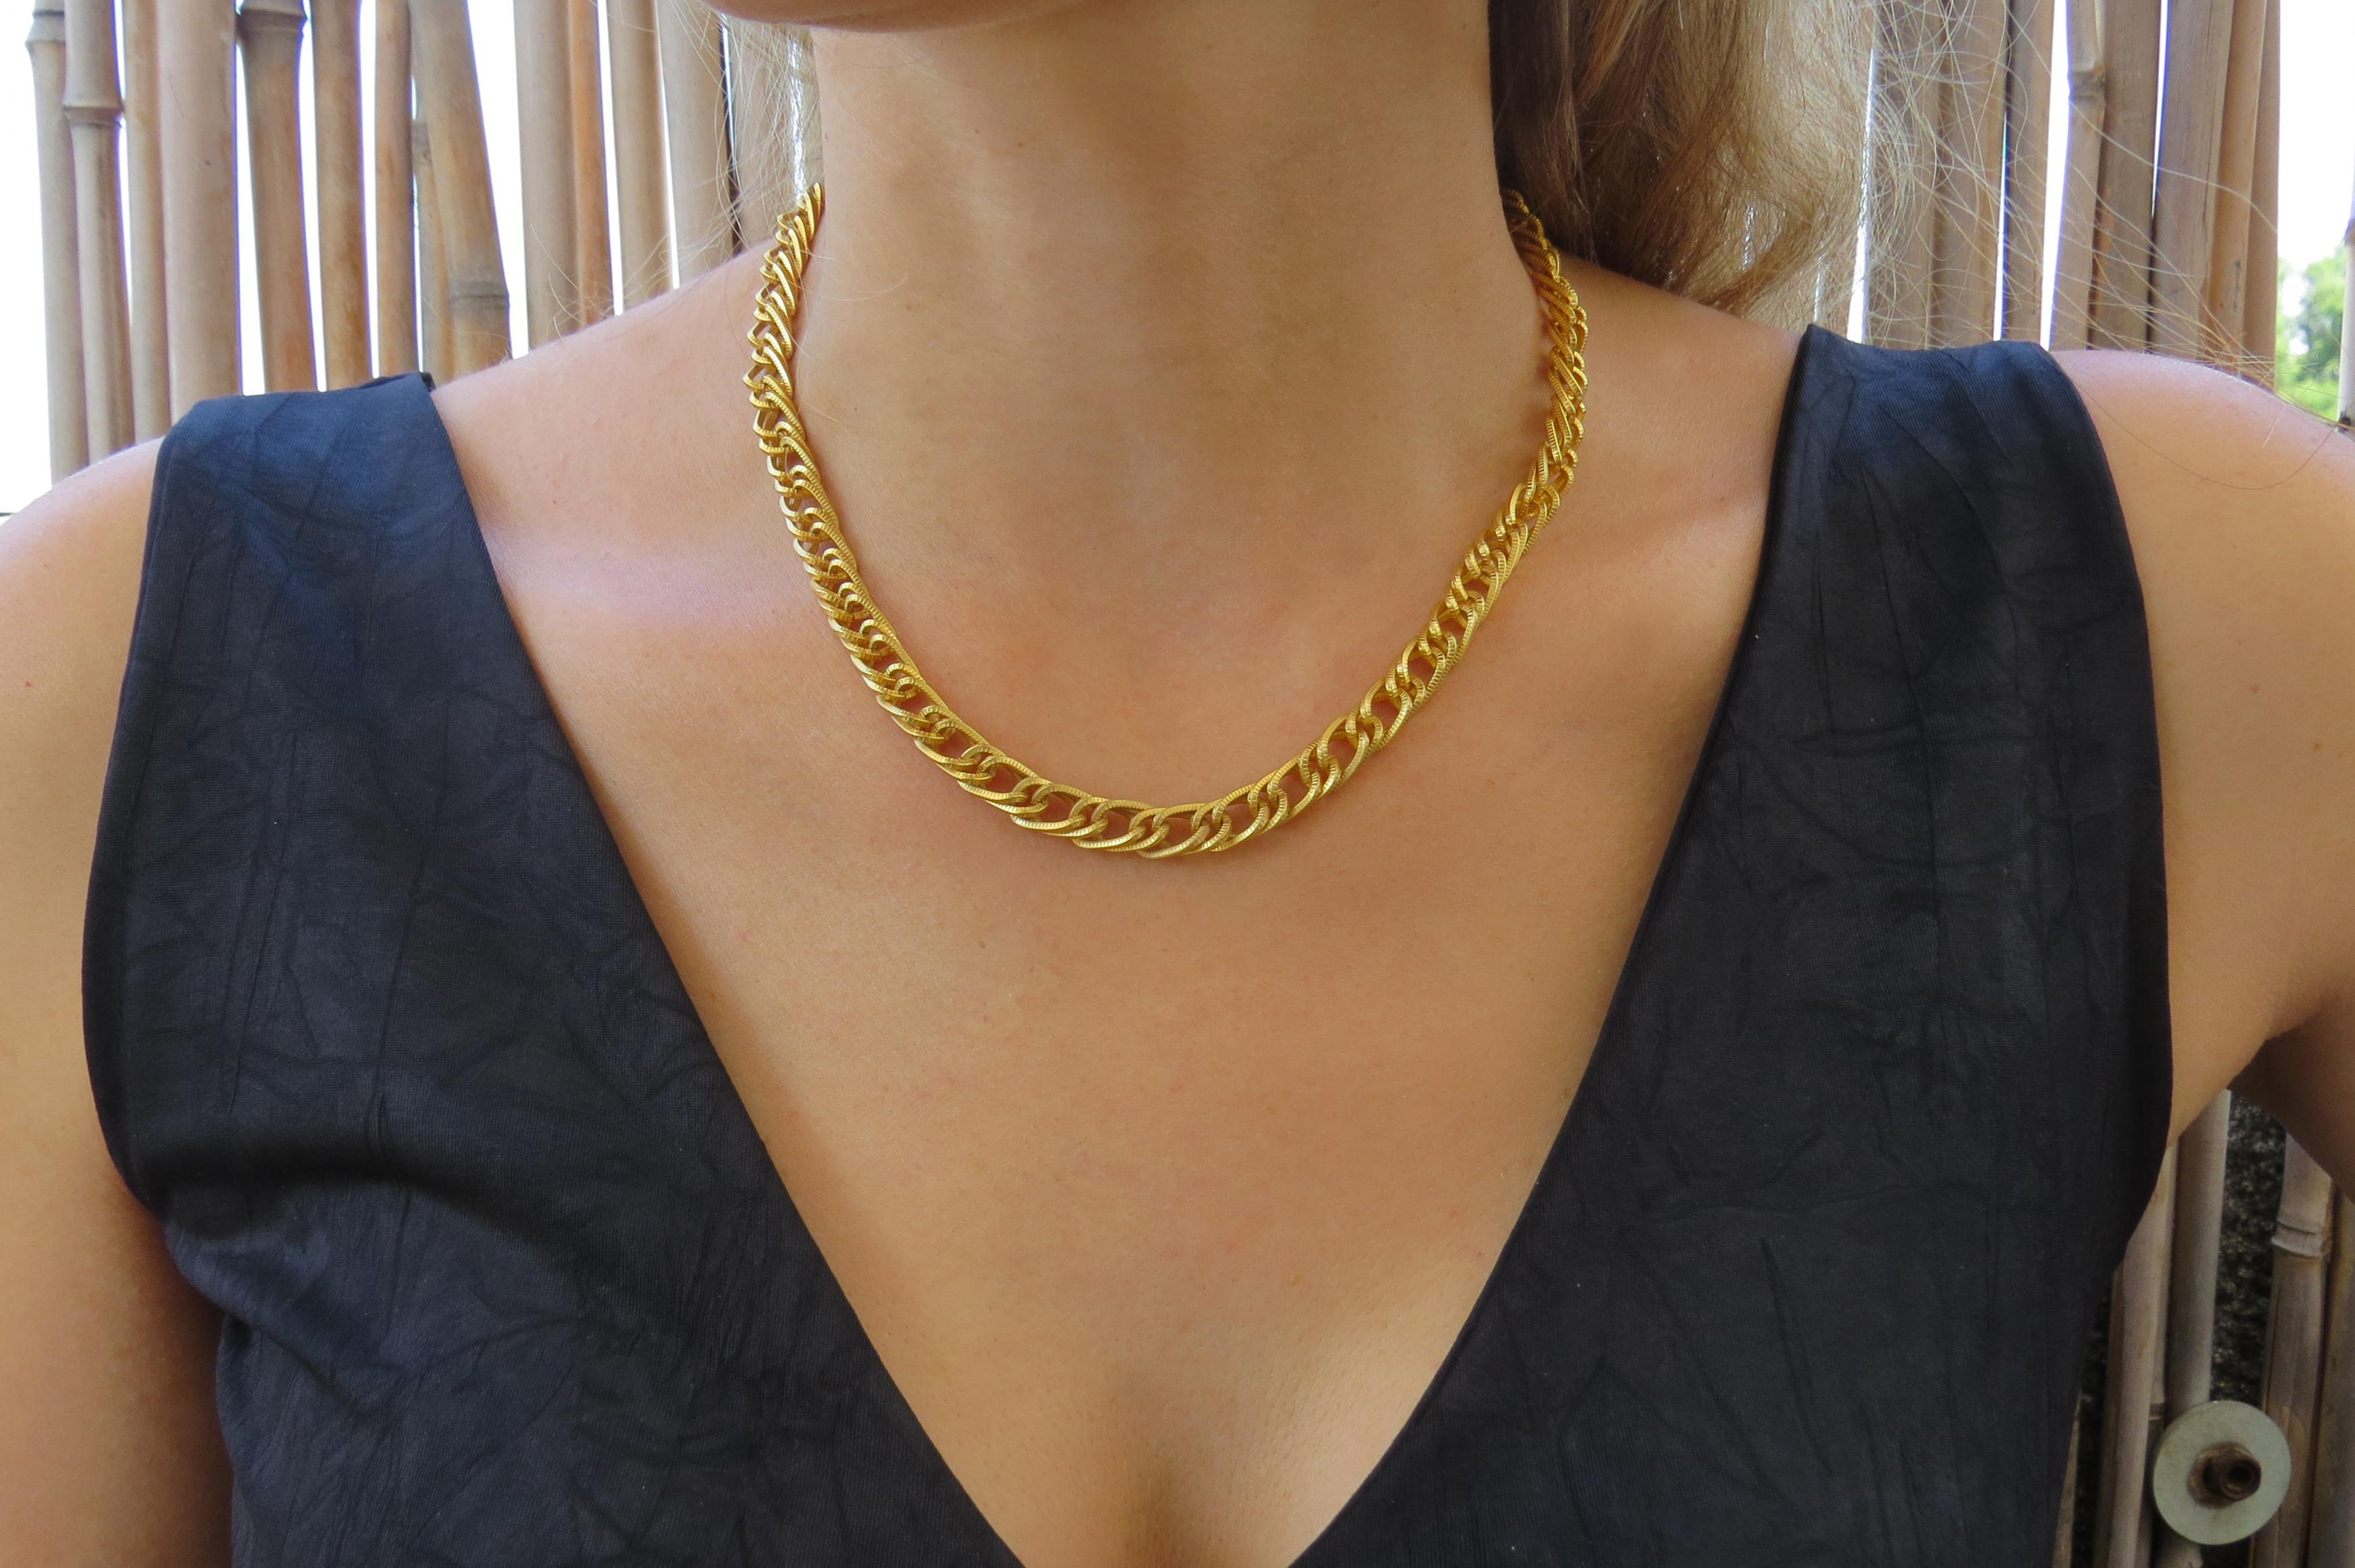 chunky chain necklace outfit